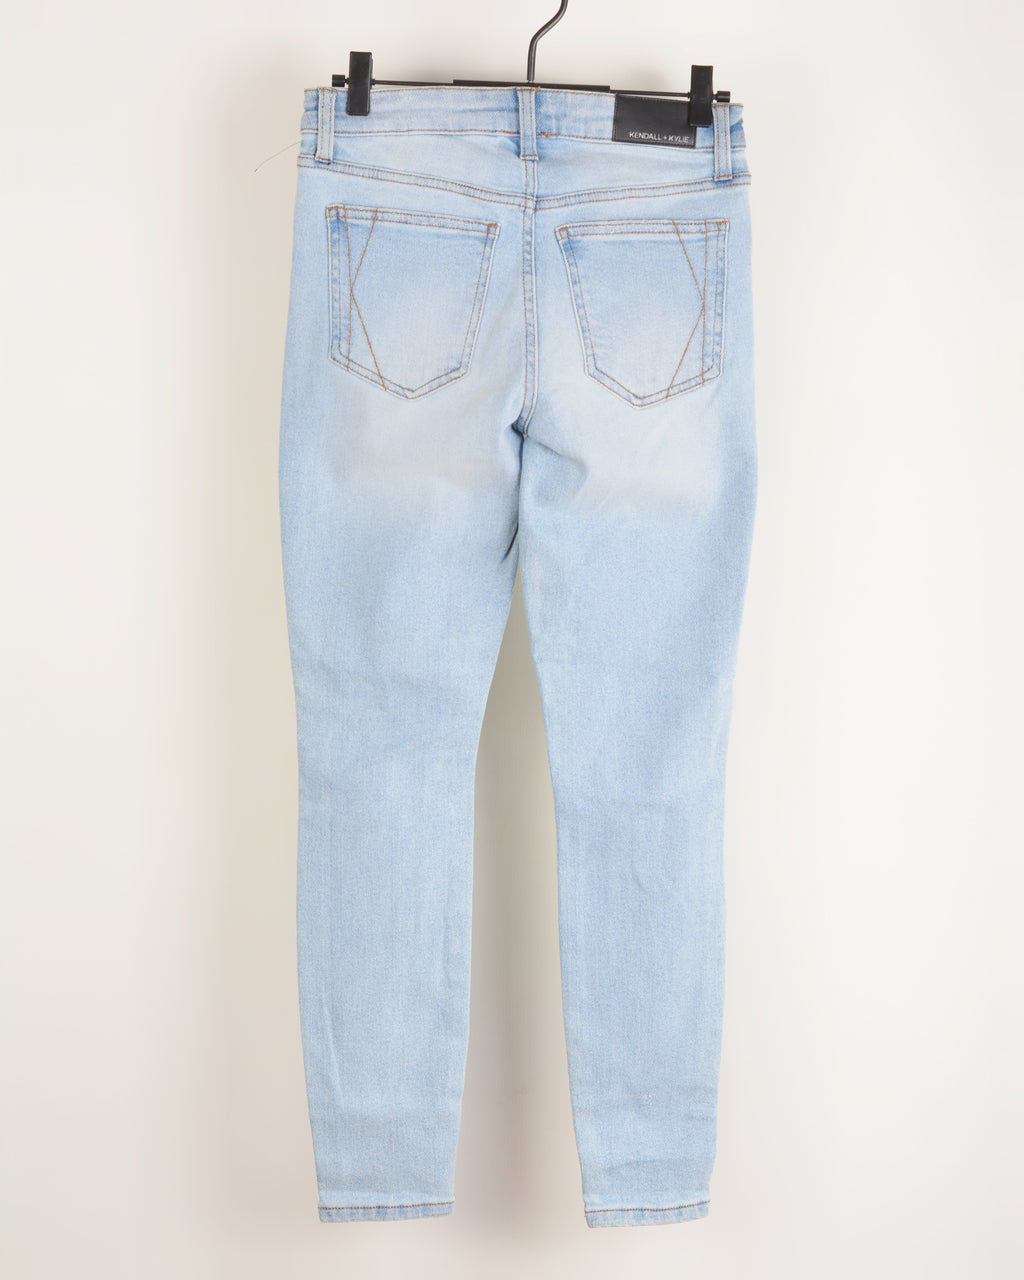 Kendall + Kylie The Ultra Babe Skinny Jeans Light Blue